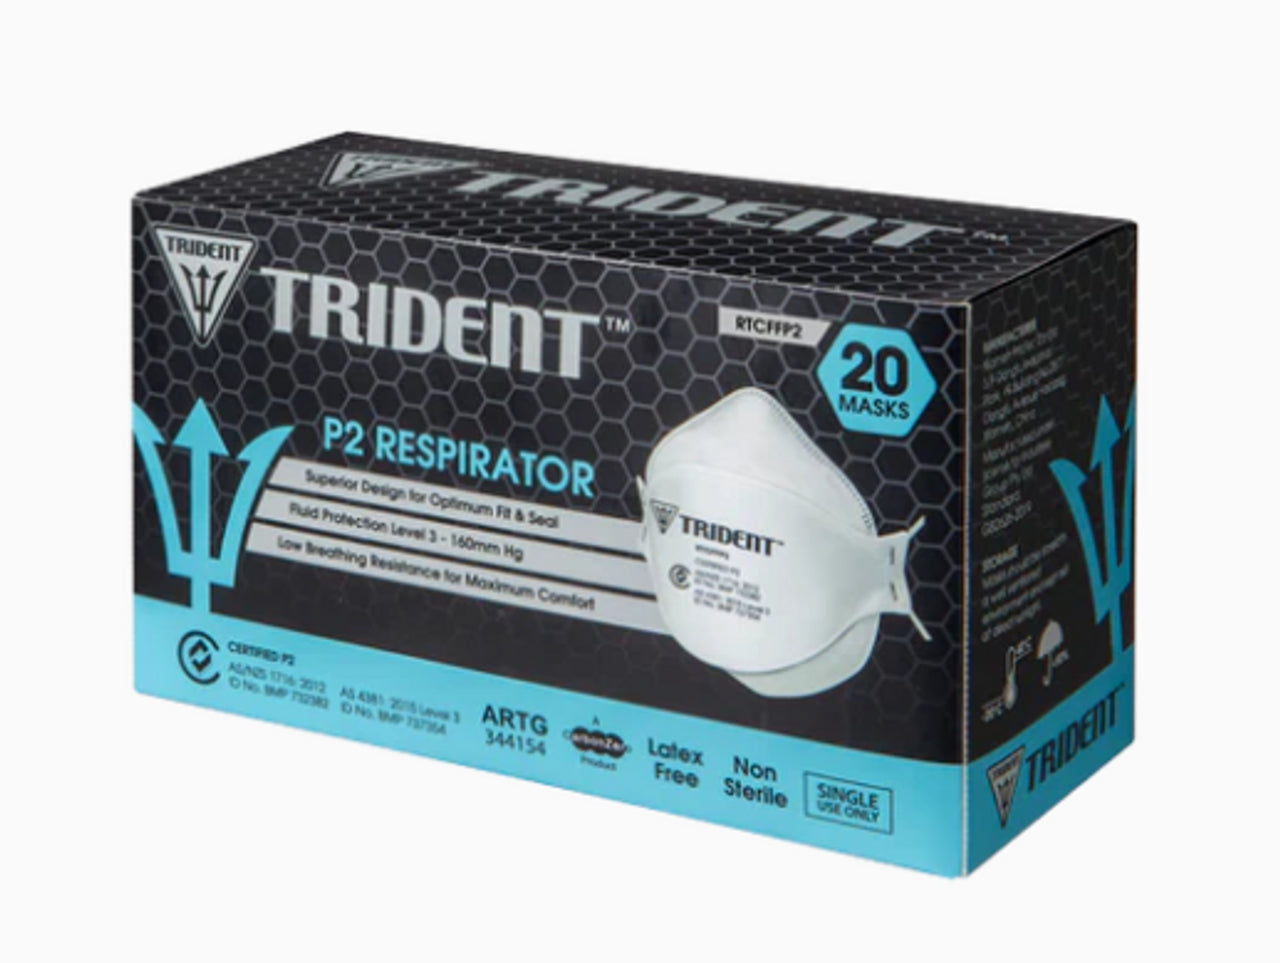 Trident™ P2 Industrial Surgical Respirator 20 Pk